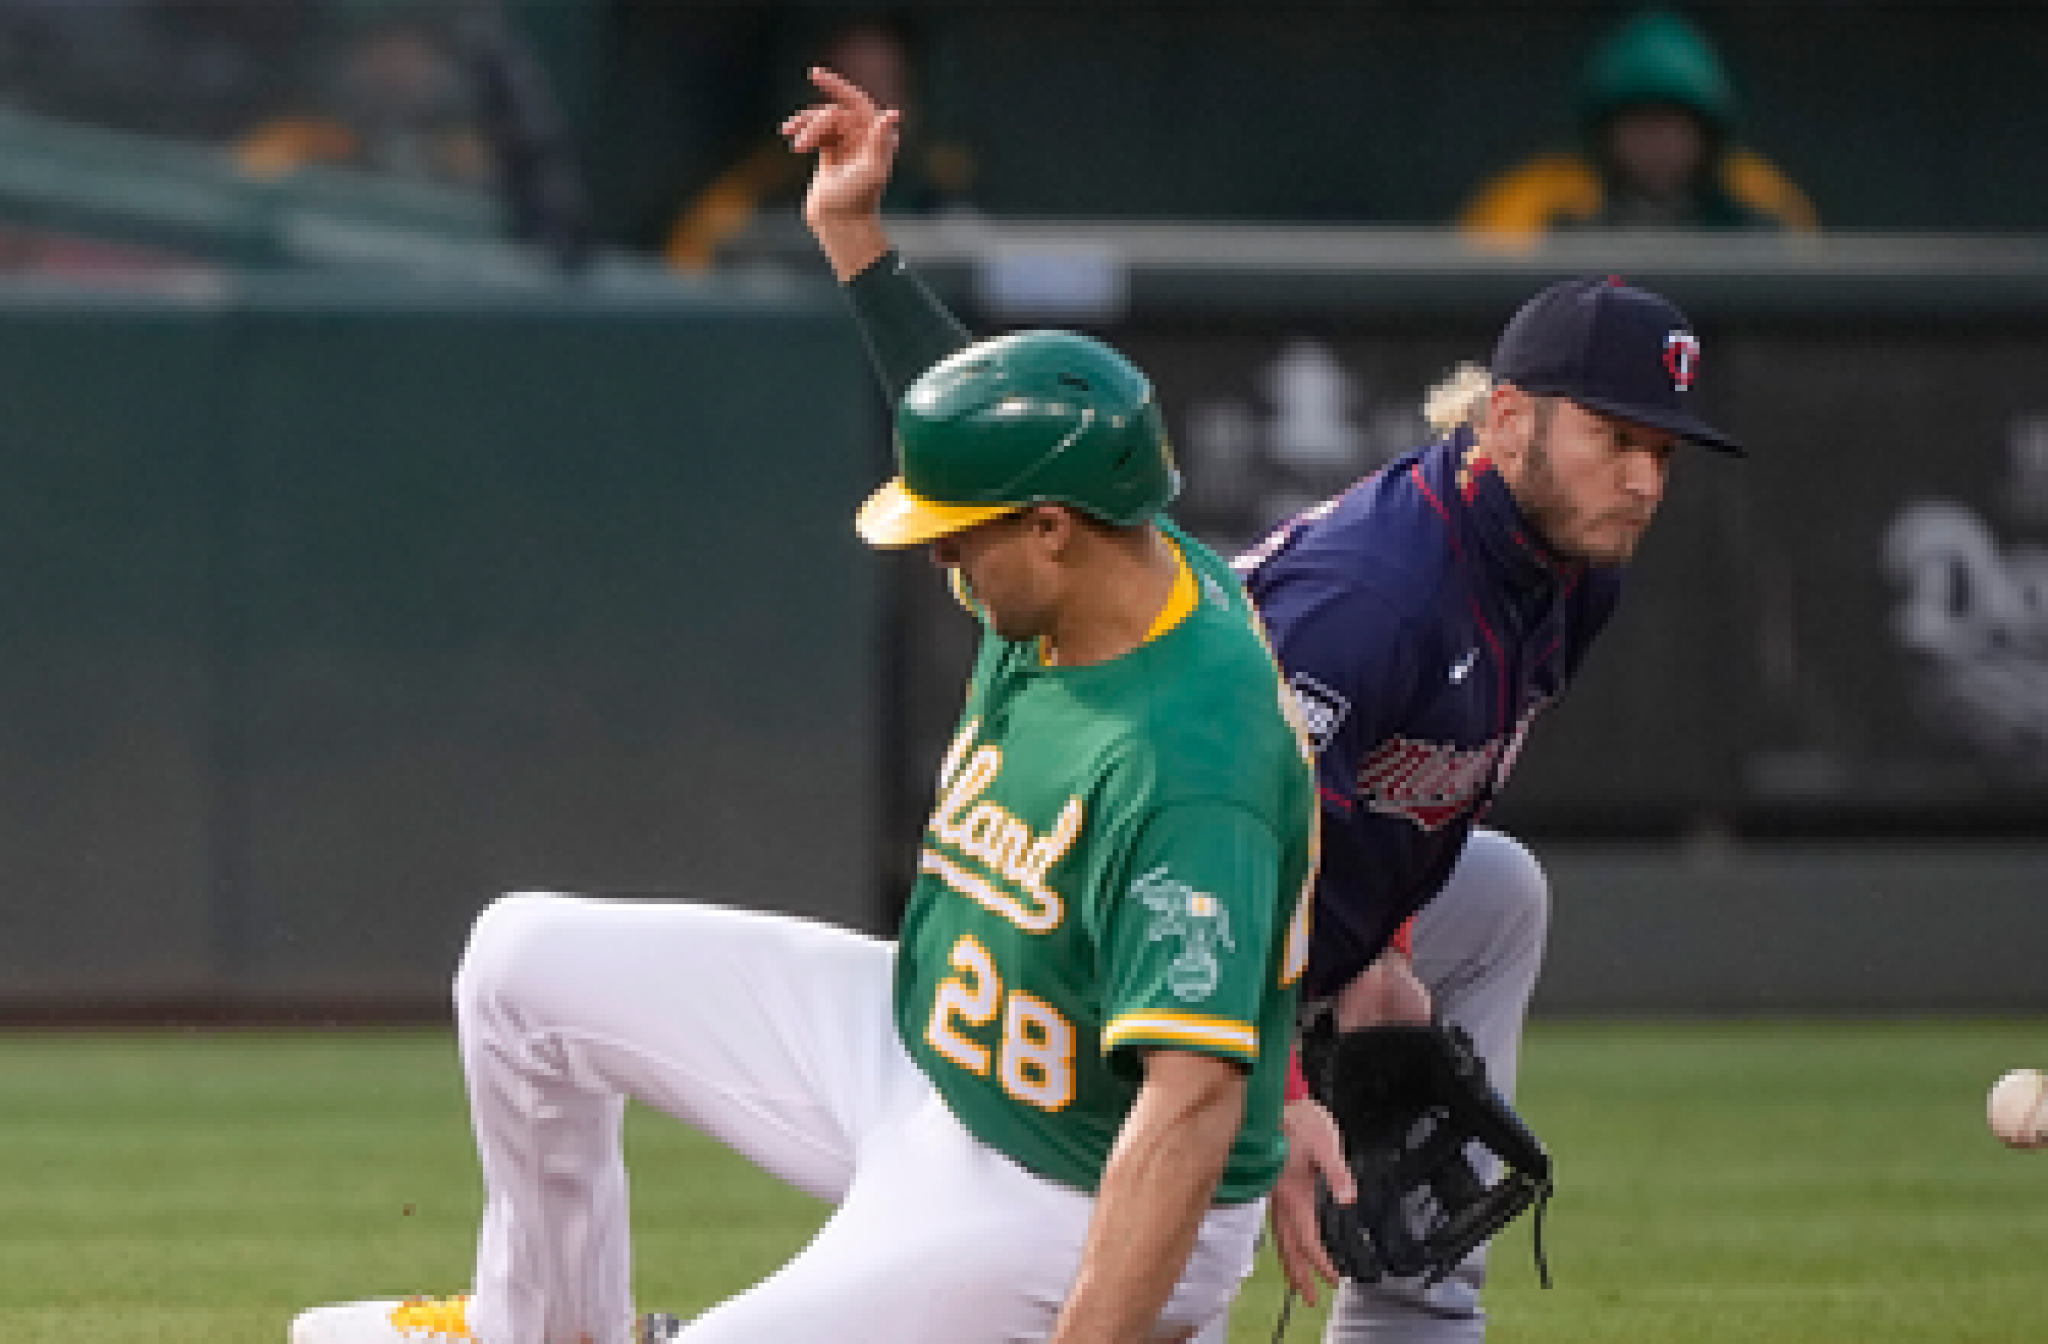 Seth Brown knocks in lone run in Athletics’ 1-0 win over Twins